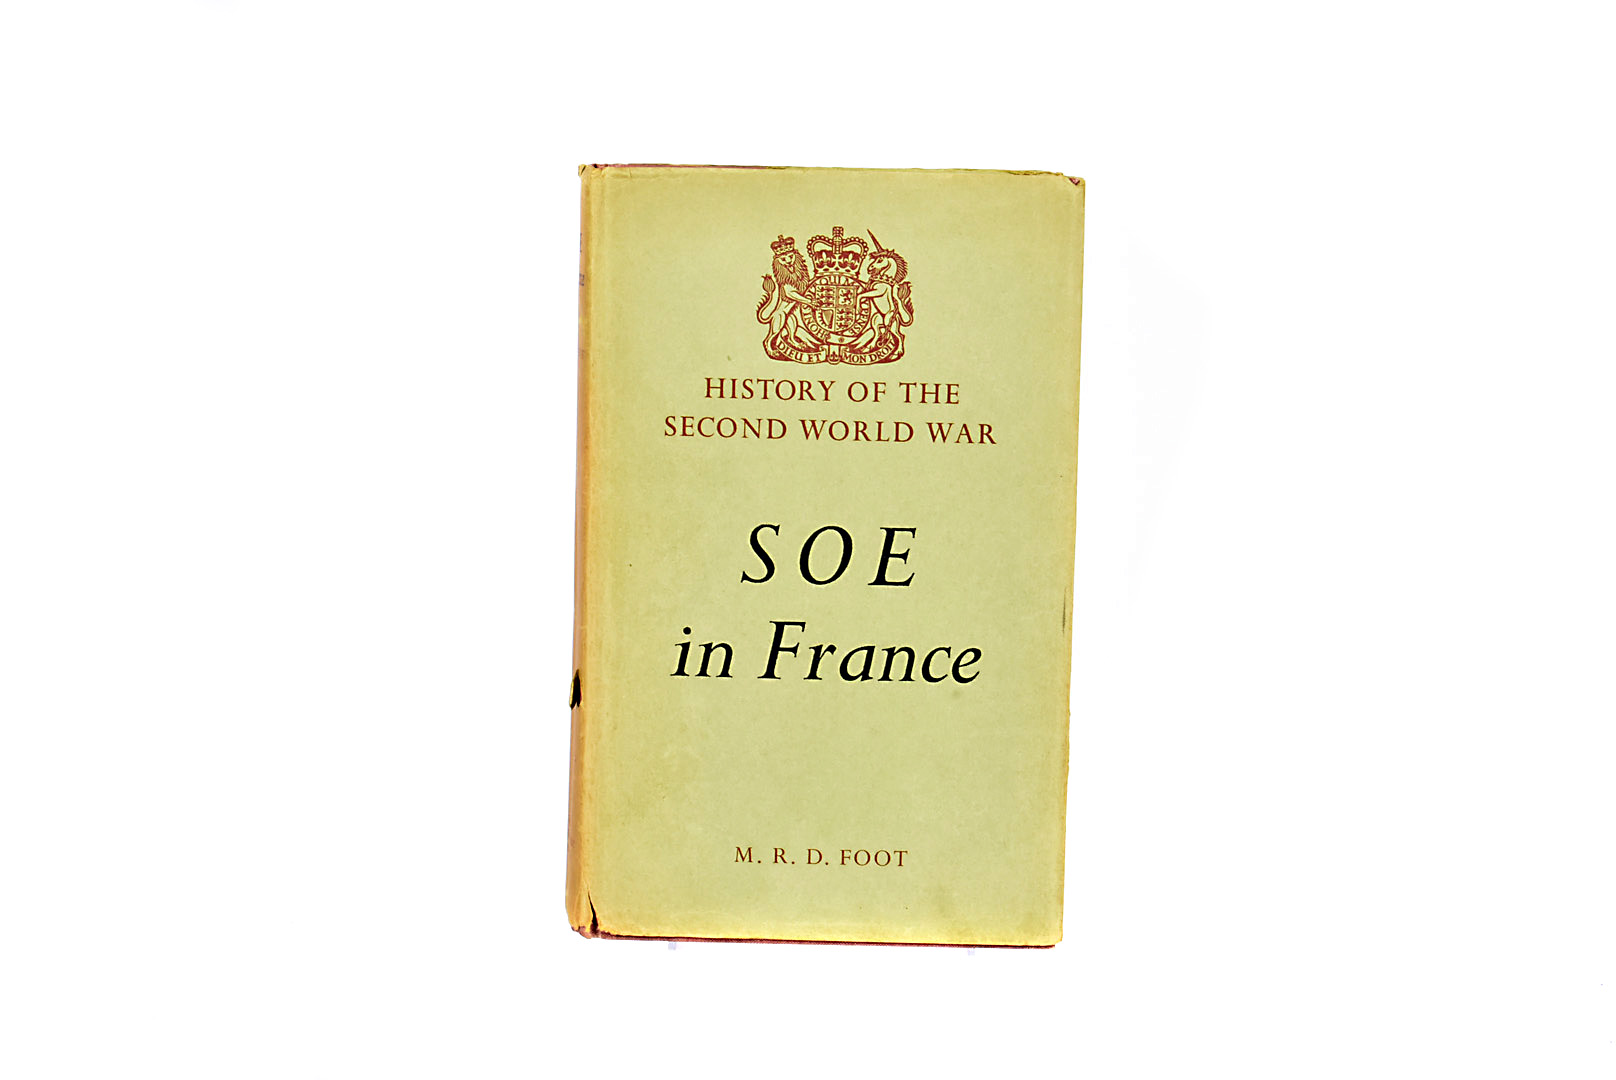 History of the Second World War: SOE in France by M.R.D Foot, dated 1966, published by Her Majesty's